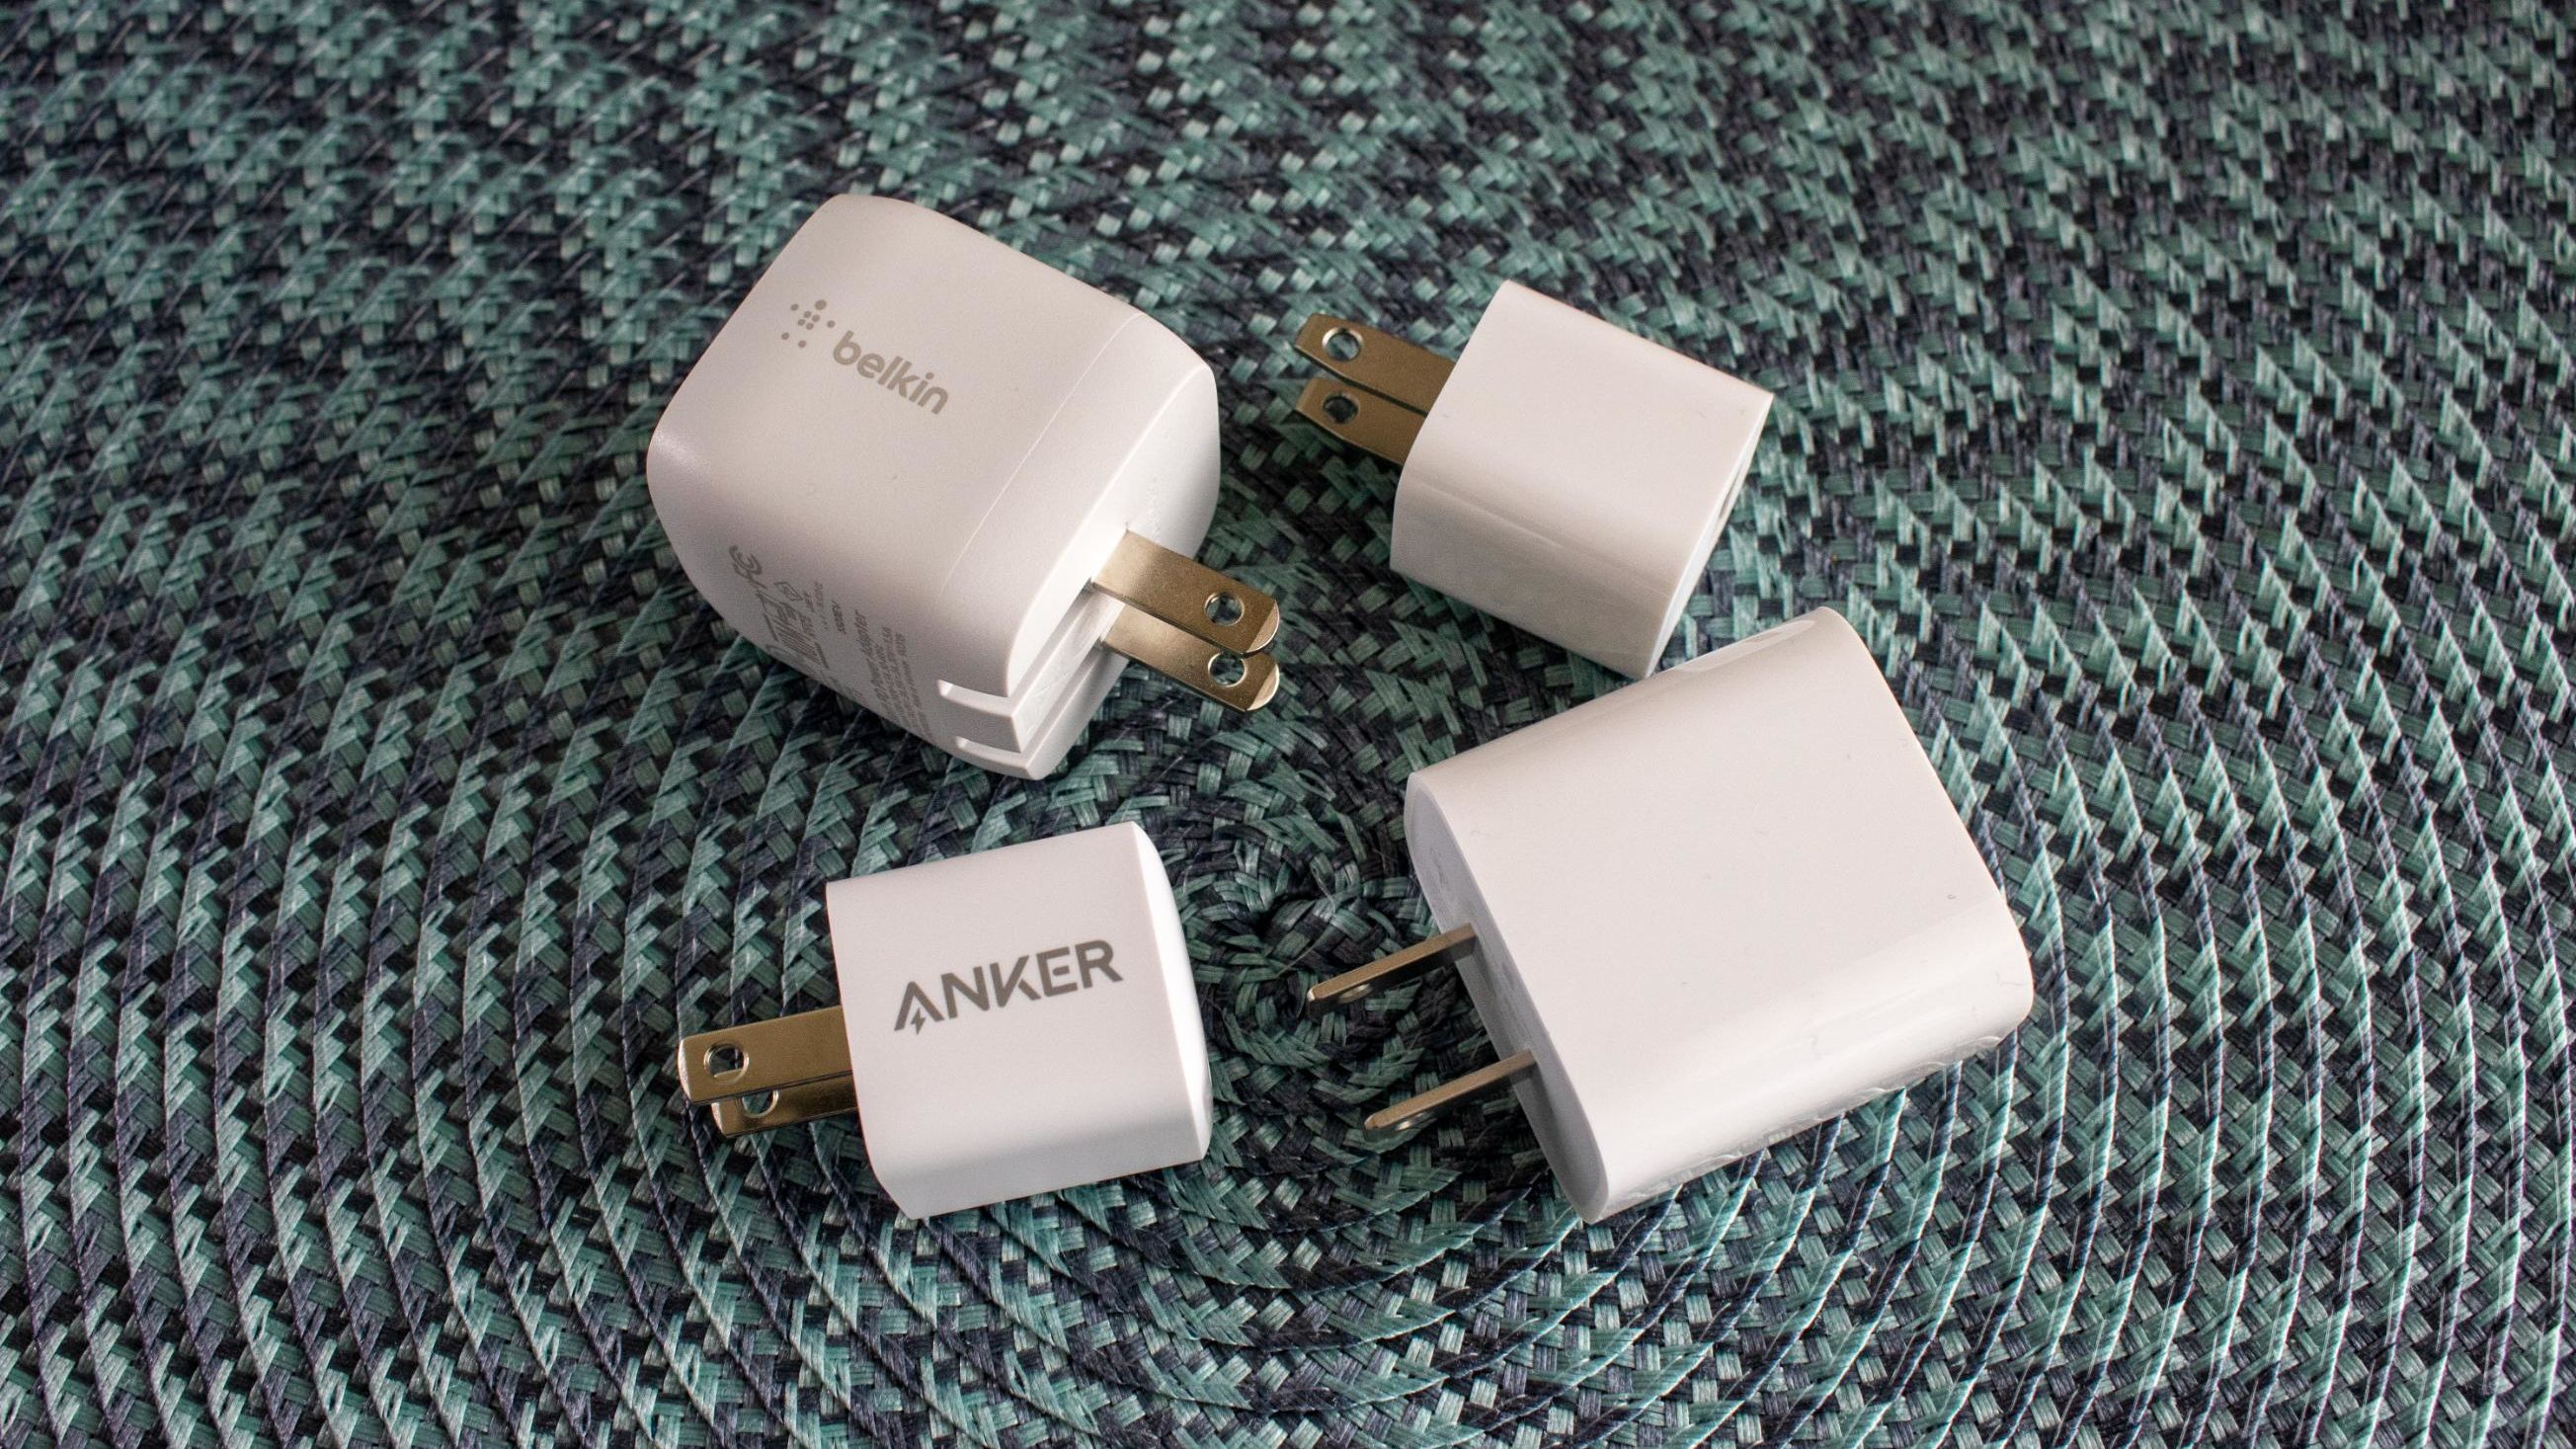 Want to fast-charge your iPhone? Here's a look at the best adapters